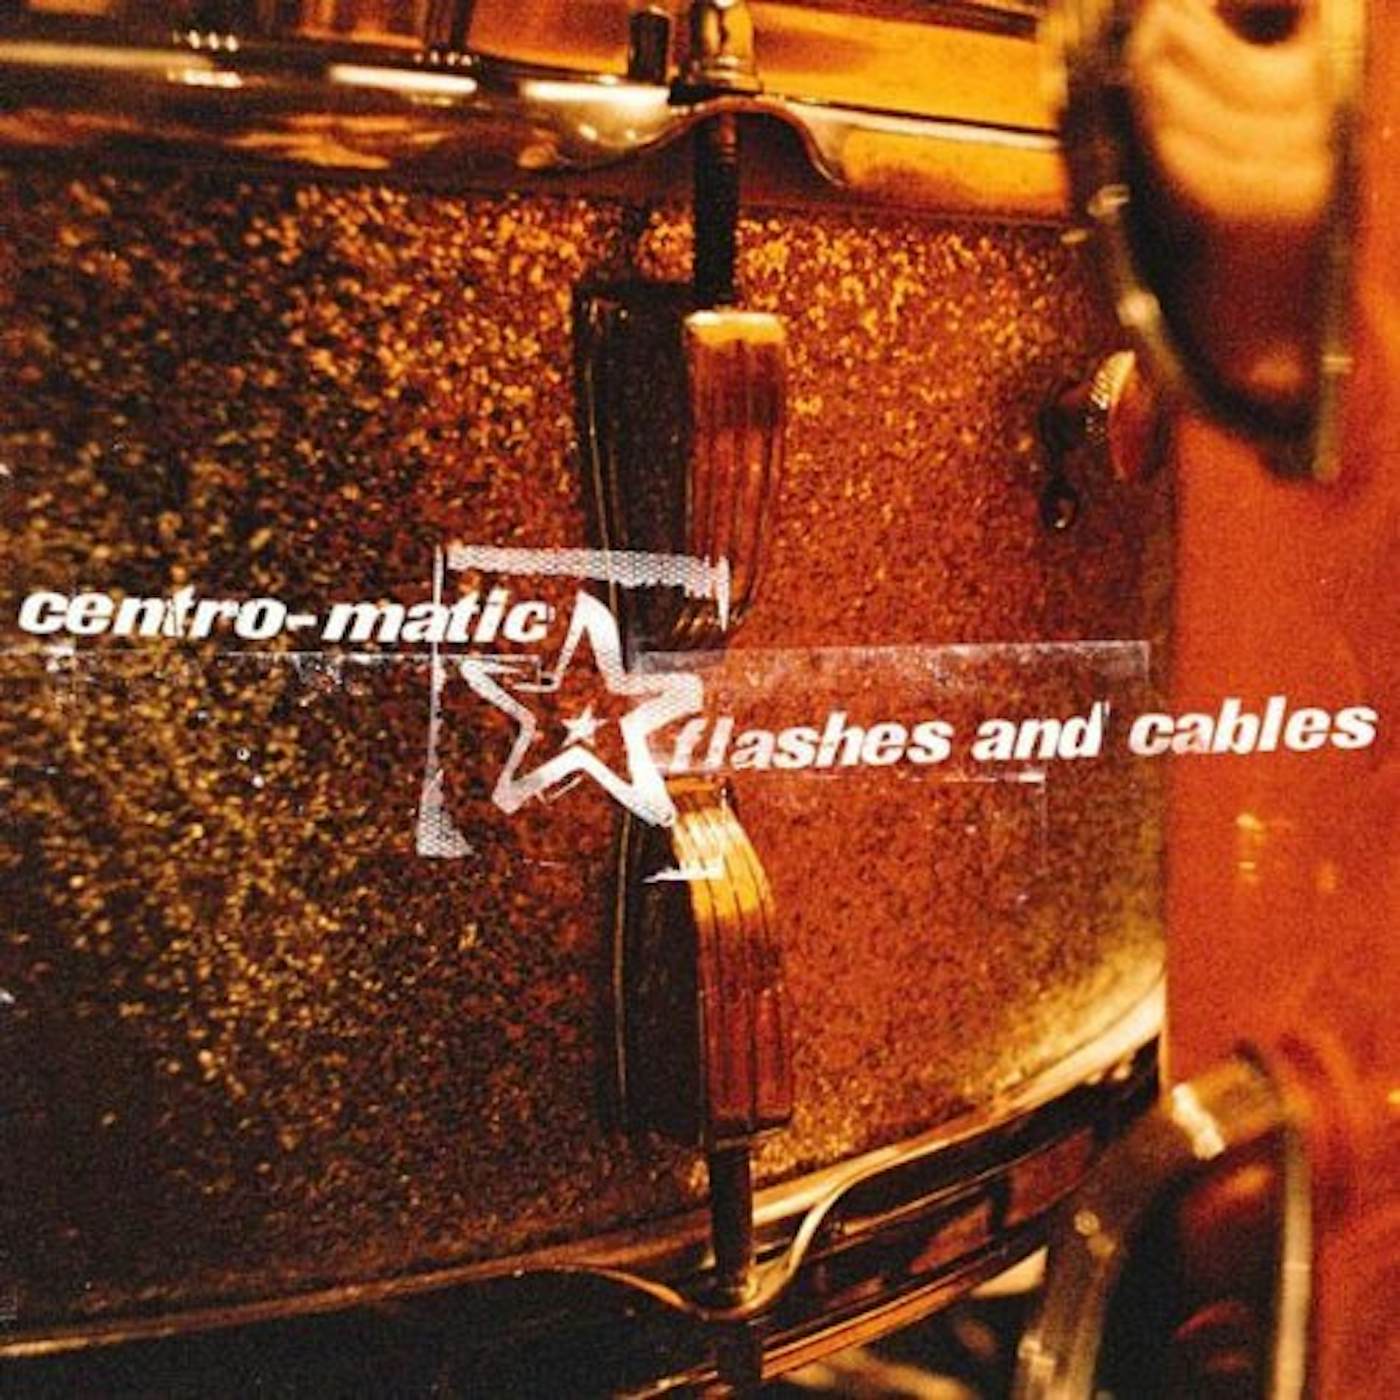 Centro-matic FLASHES & CABLES CD